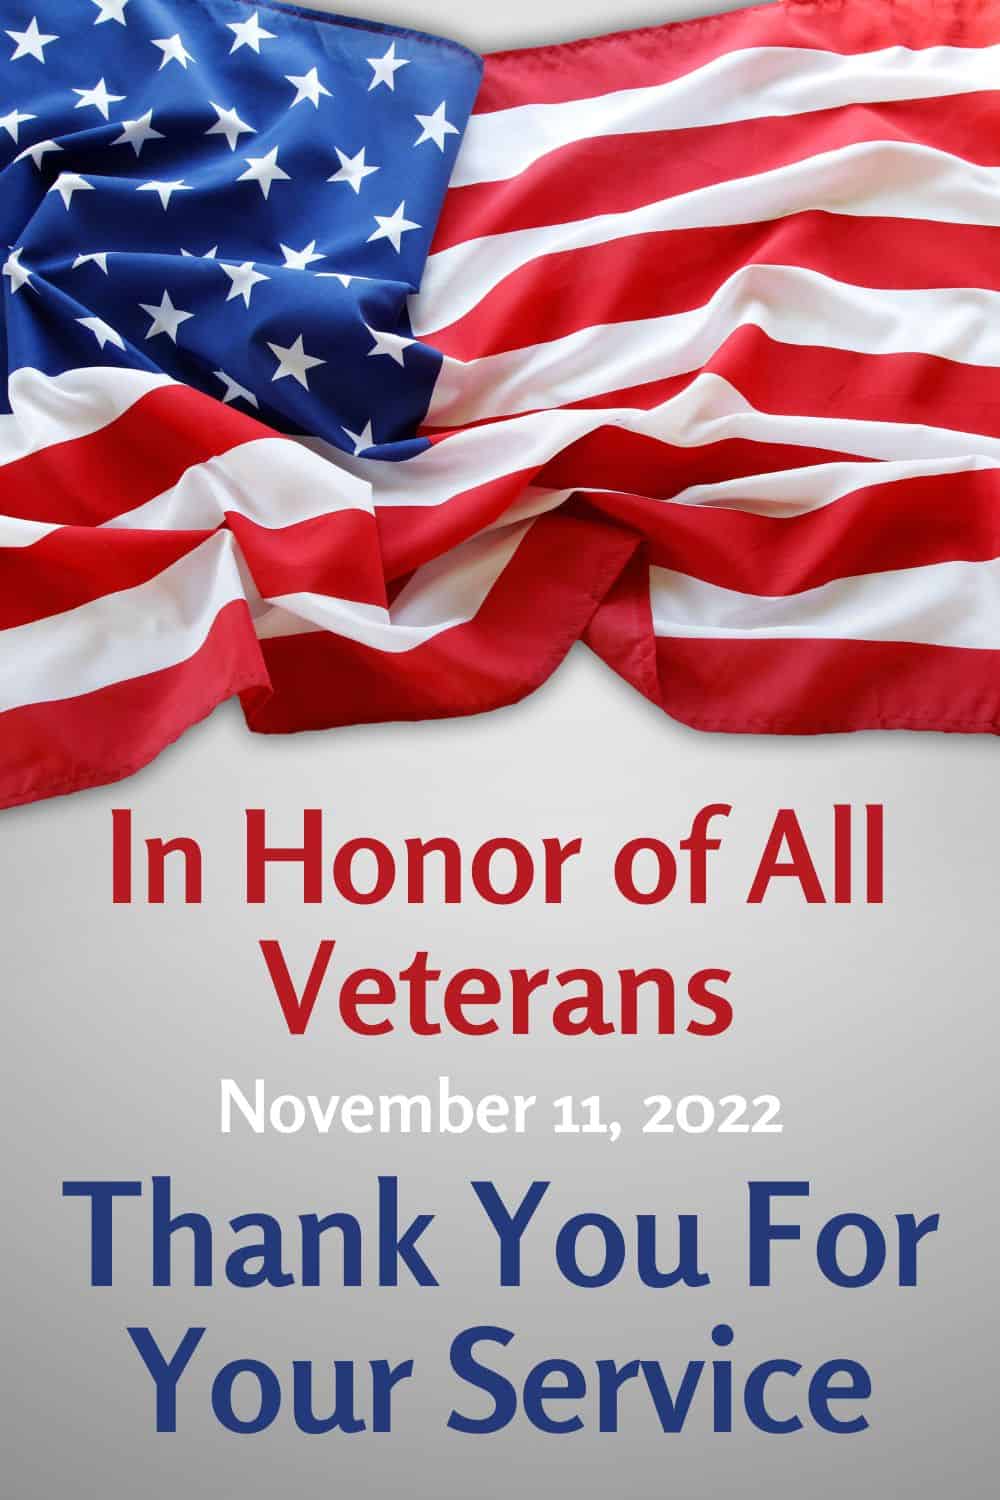 In honor of all veterans November 11, 2022, thank you for your service.